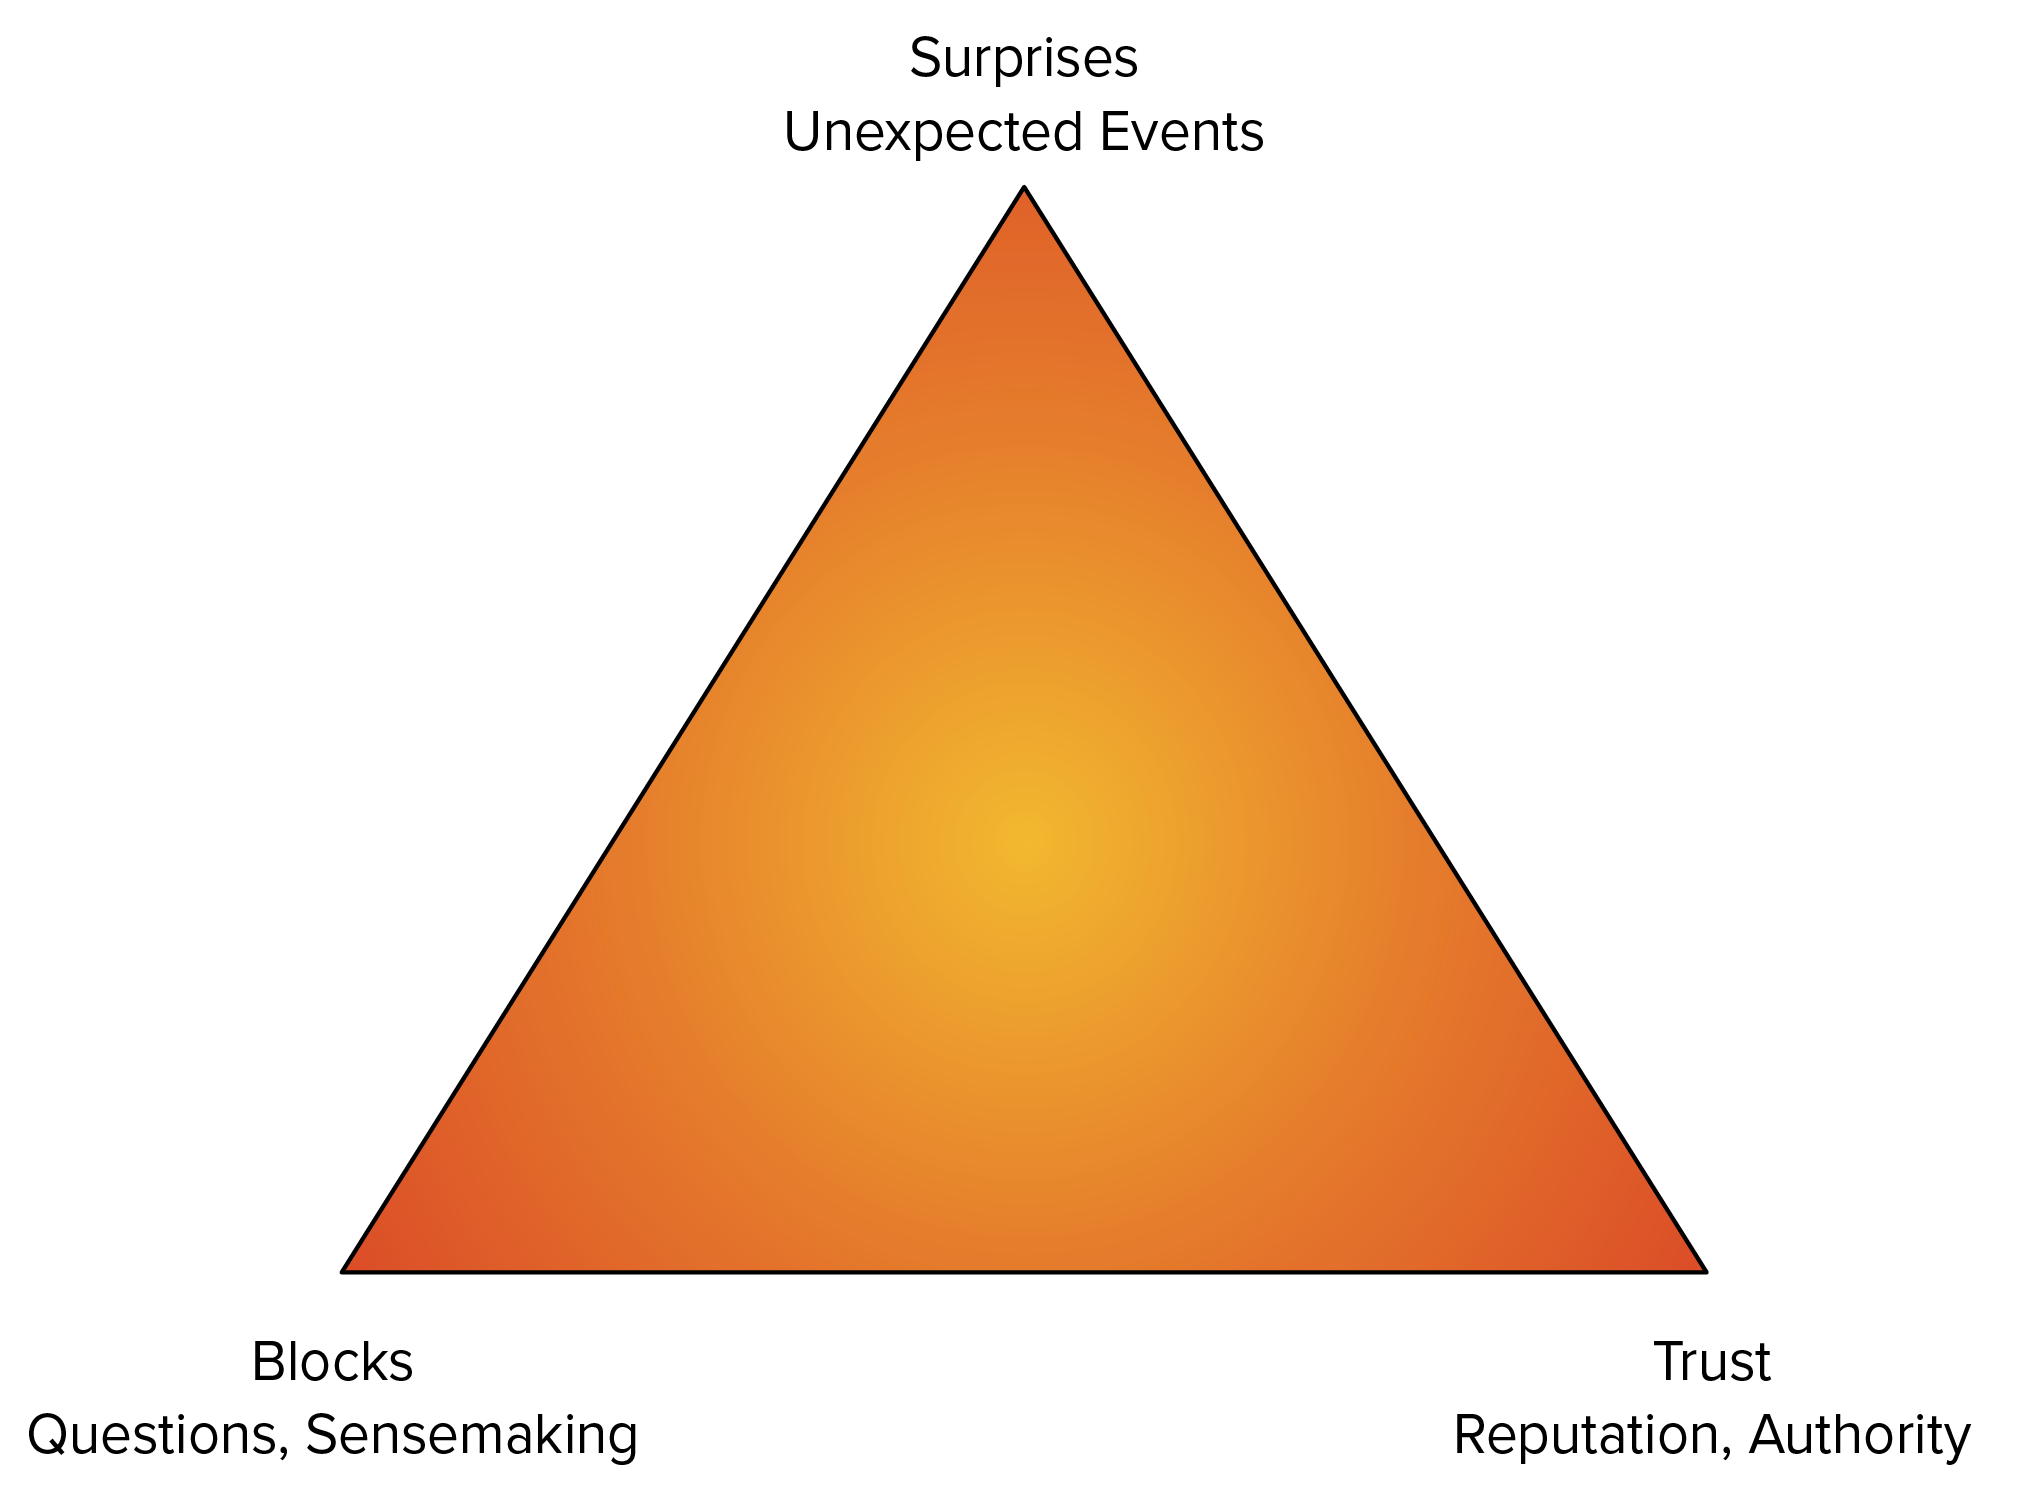 Ad-Hoc Meeting Drivers: Surprises, Blocks, and Trust as three points on a triangle